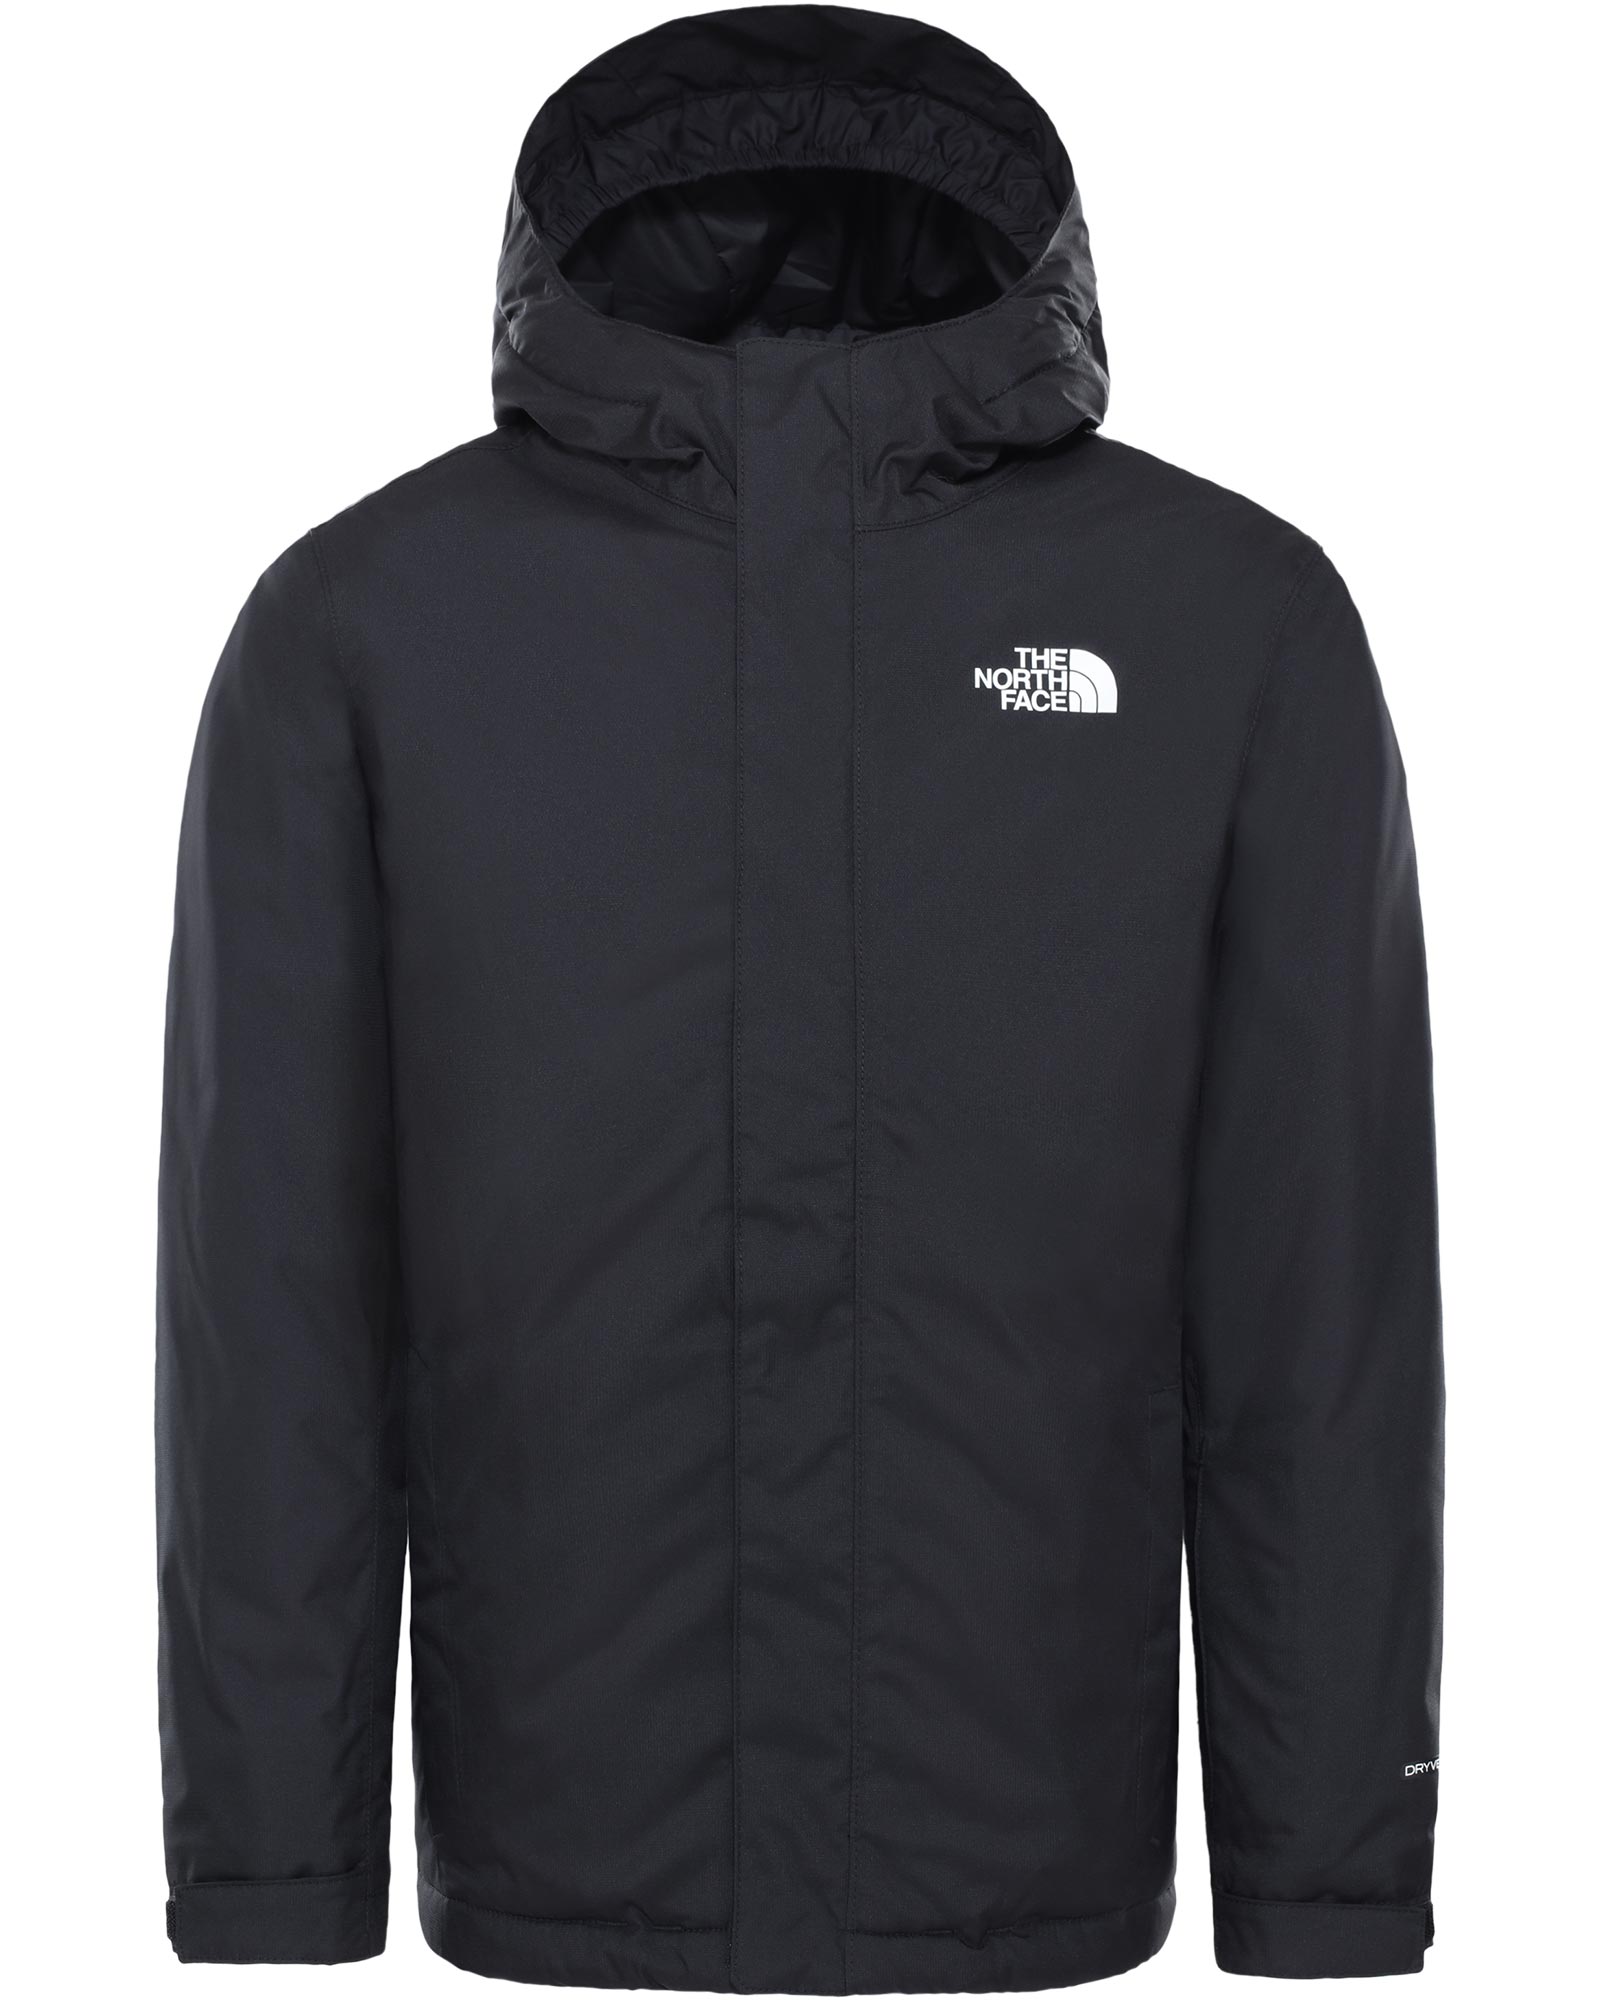 The North Face Youth Snowquest DryVent Jacket - TNF Black S